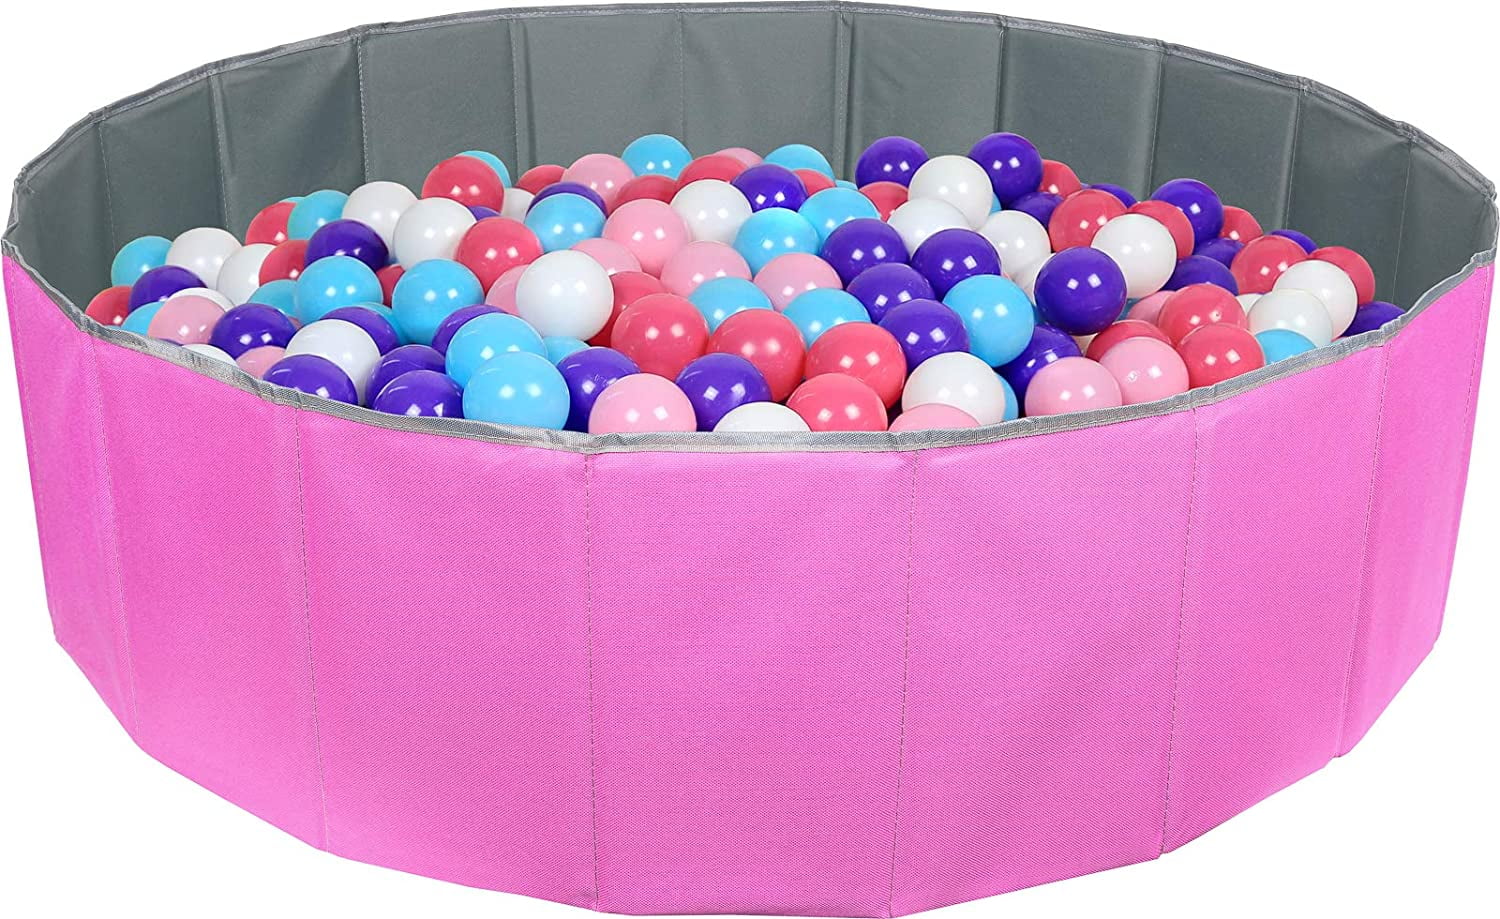 300 Pink Coloured Kids Soft Plastic Balls Bouncy Castle Pits Garden Play Room 